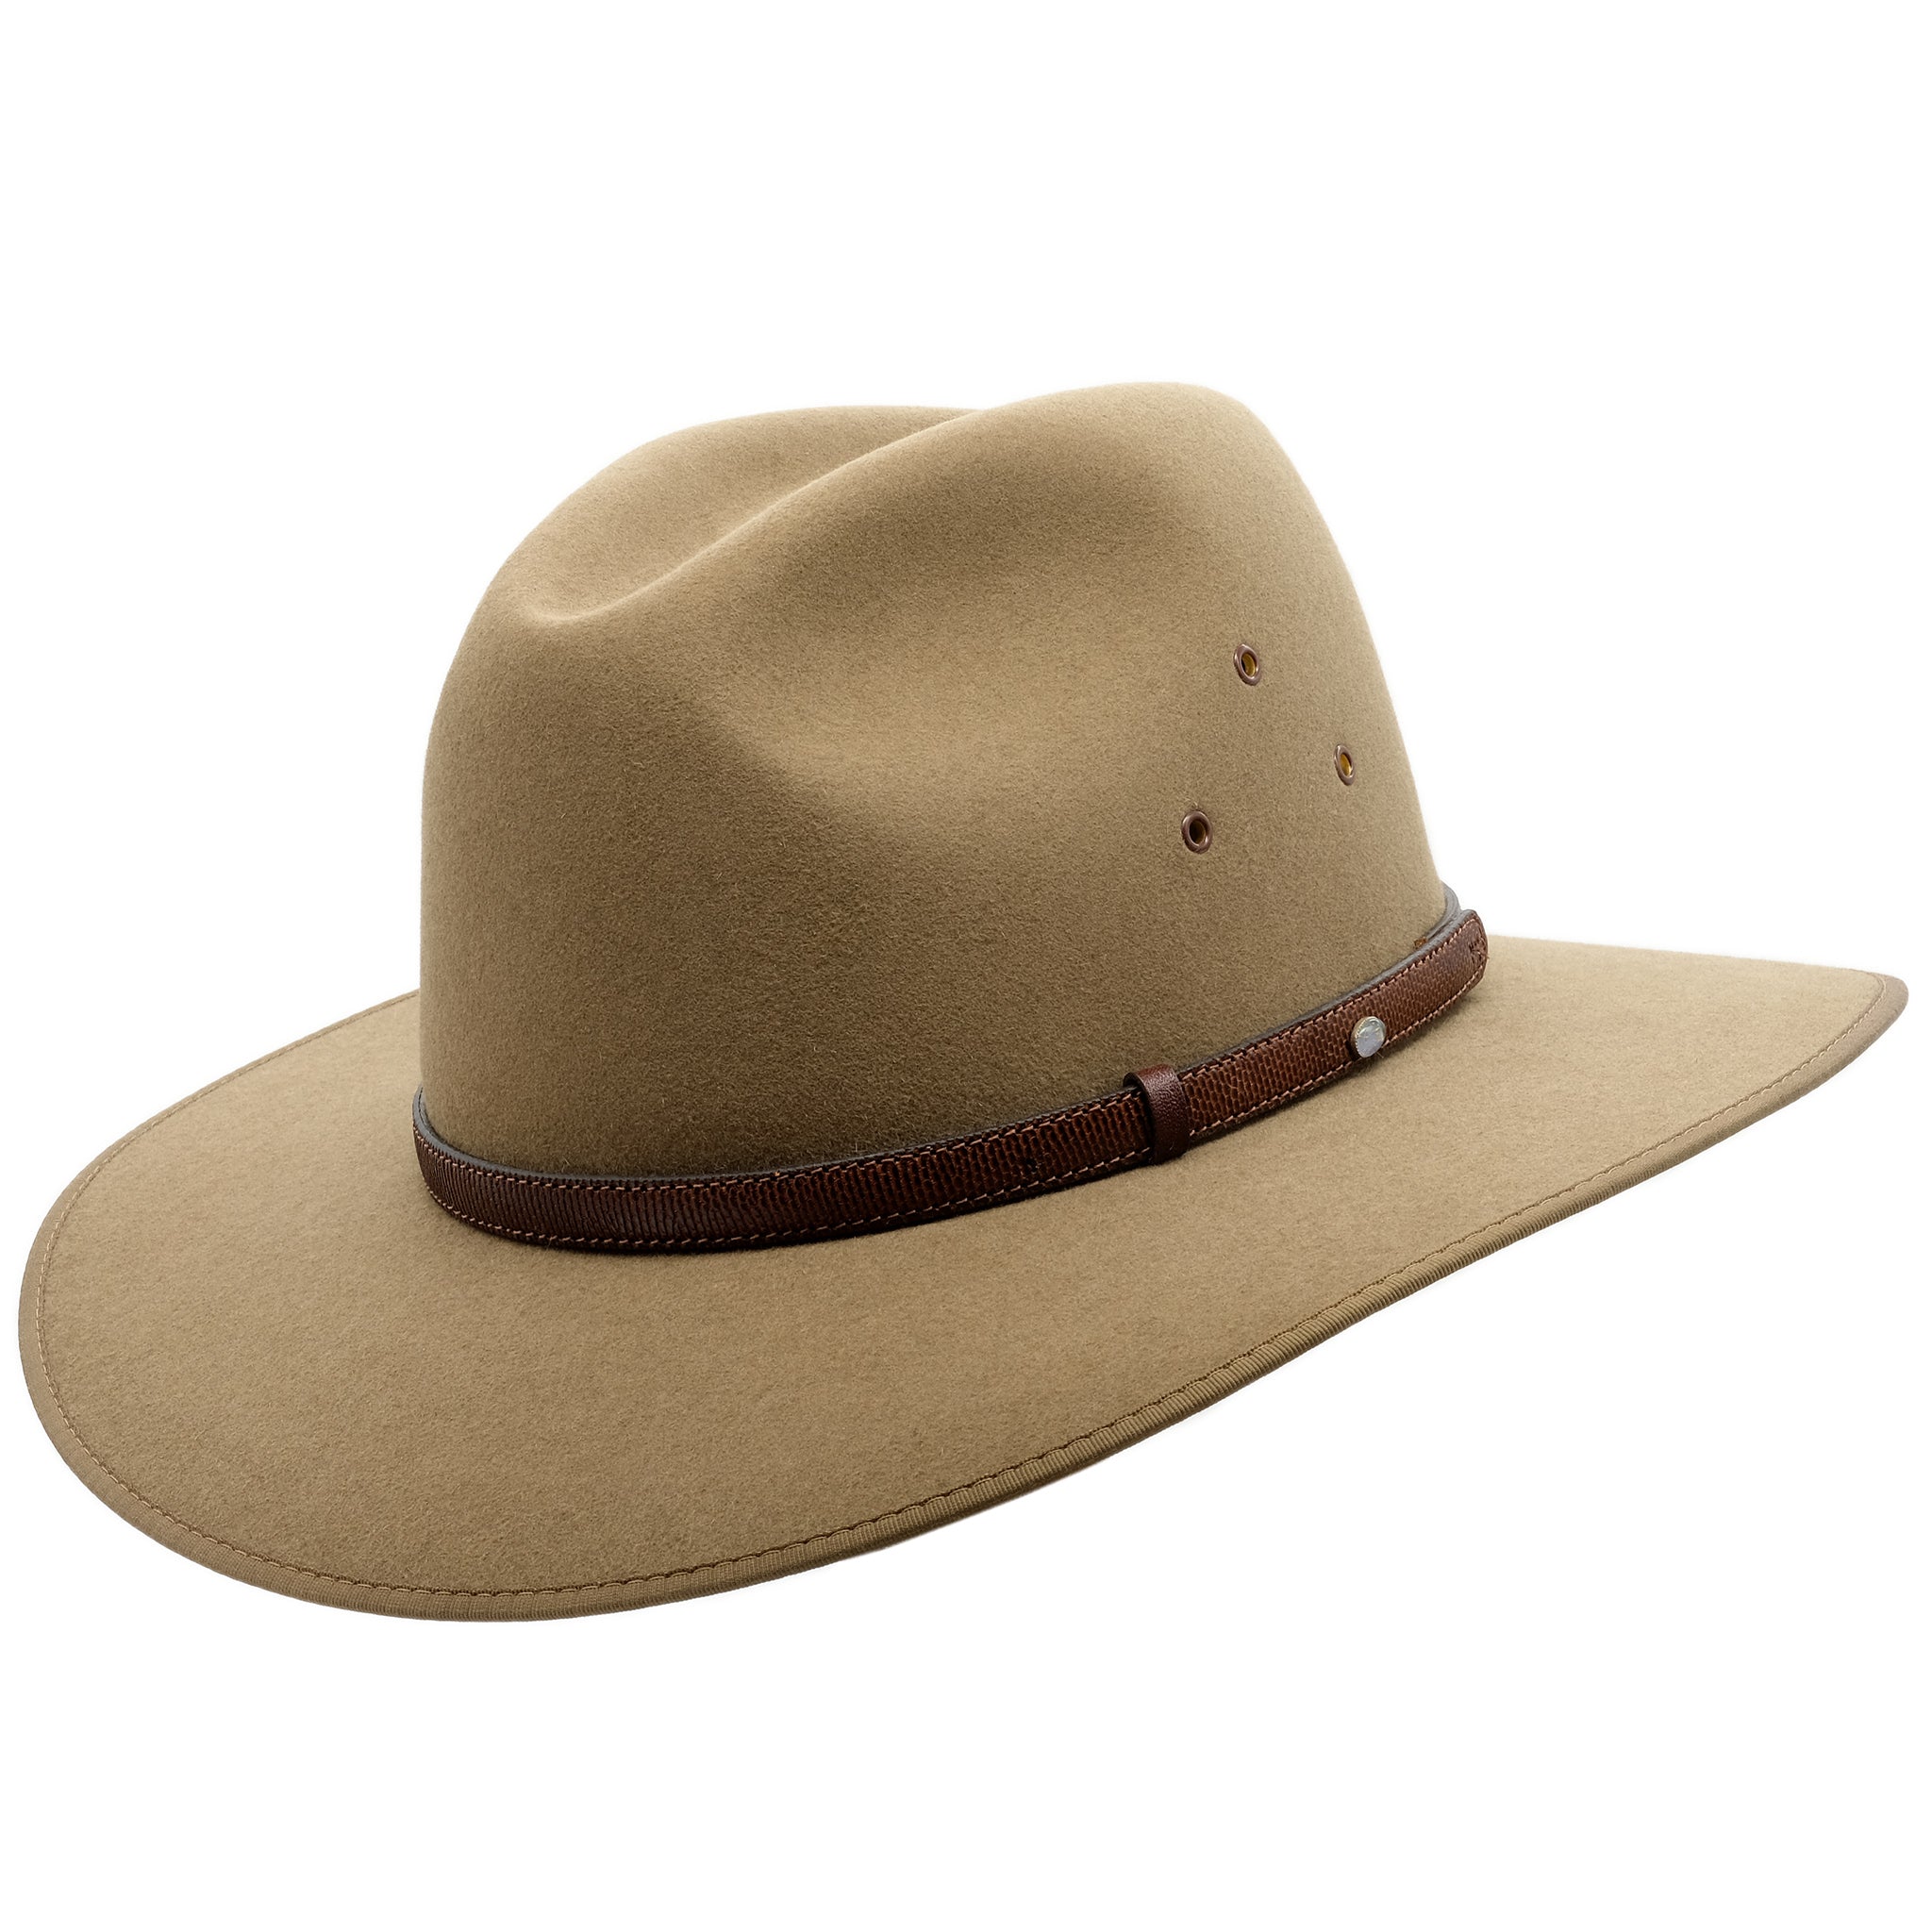 Angle view of the Akubra Coober Pedy hat in Santone colour